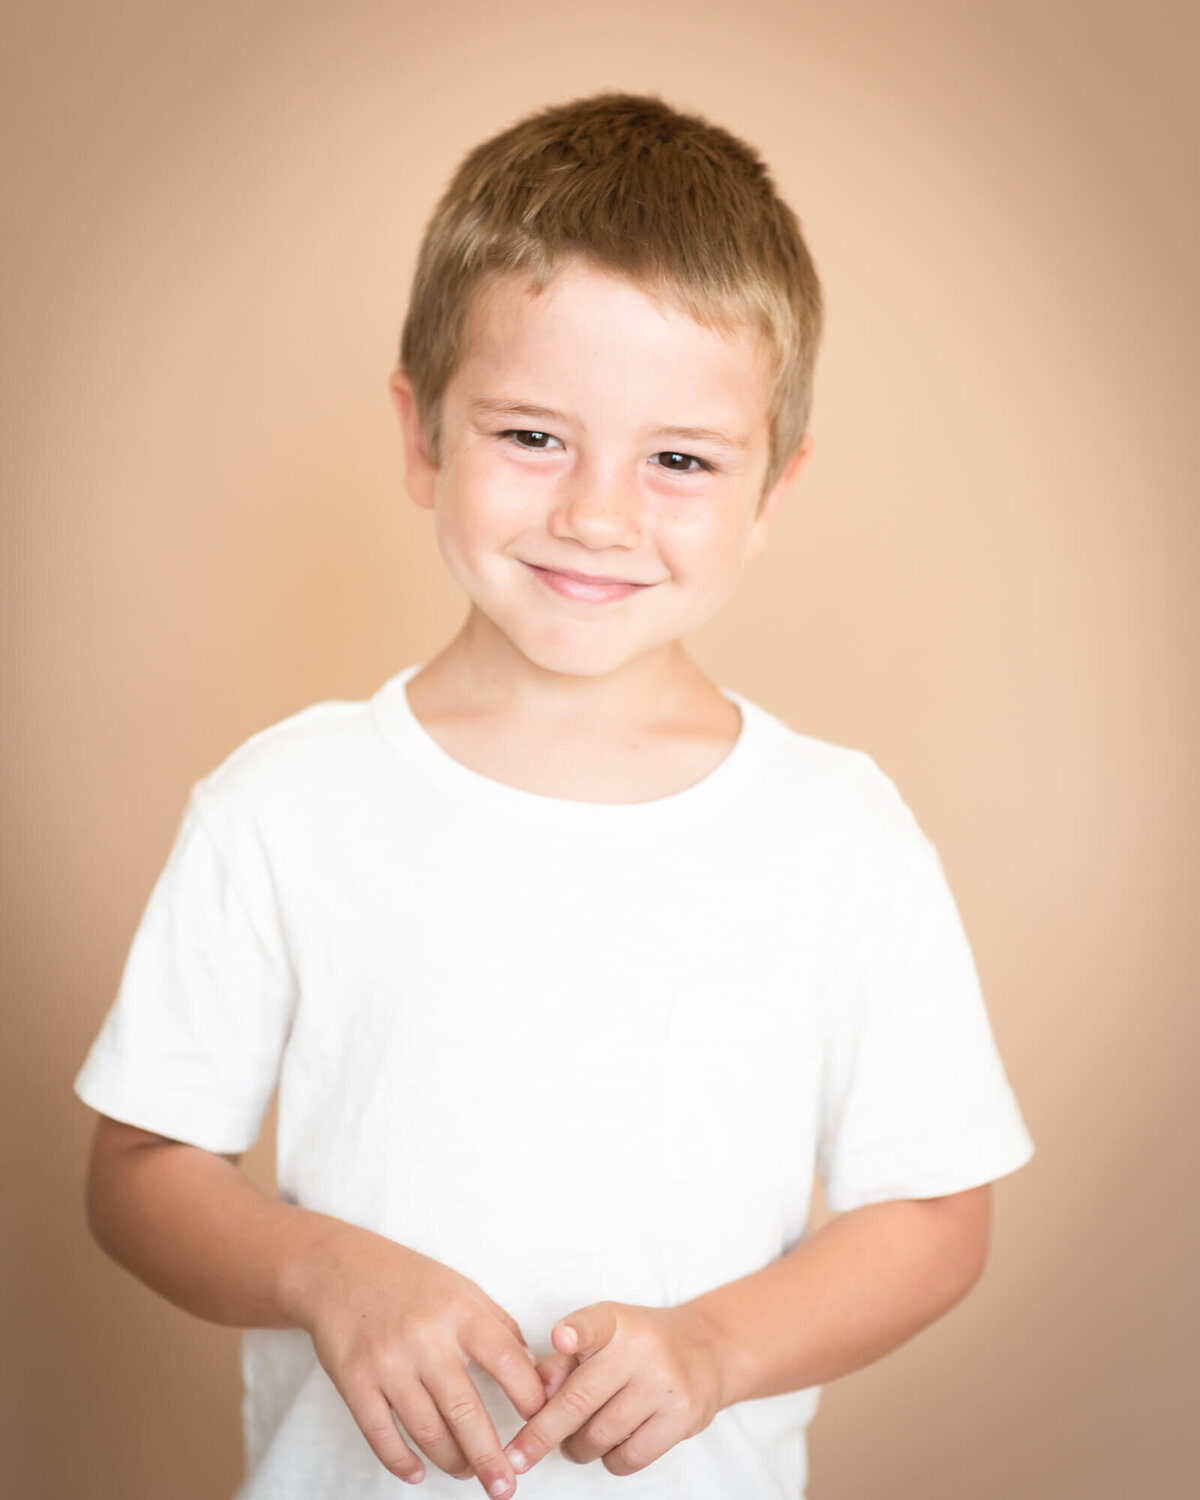 adorable young boy smiling wearing white tee shirt with a tan background